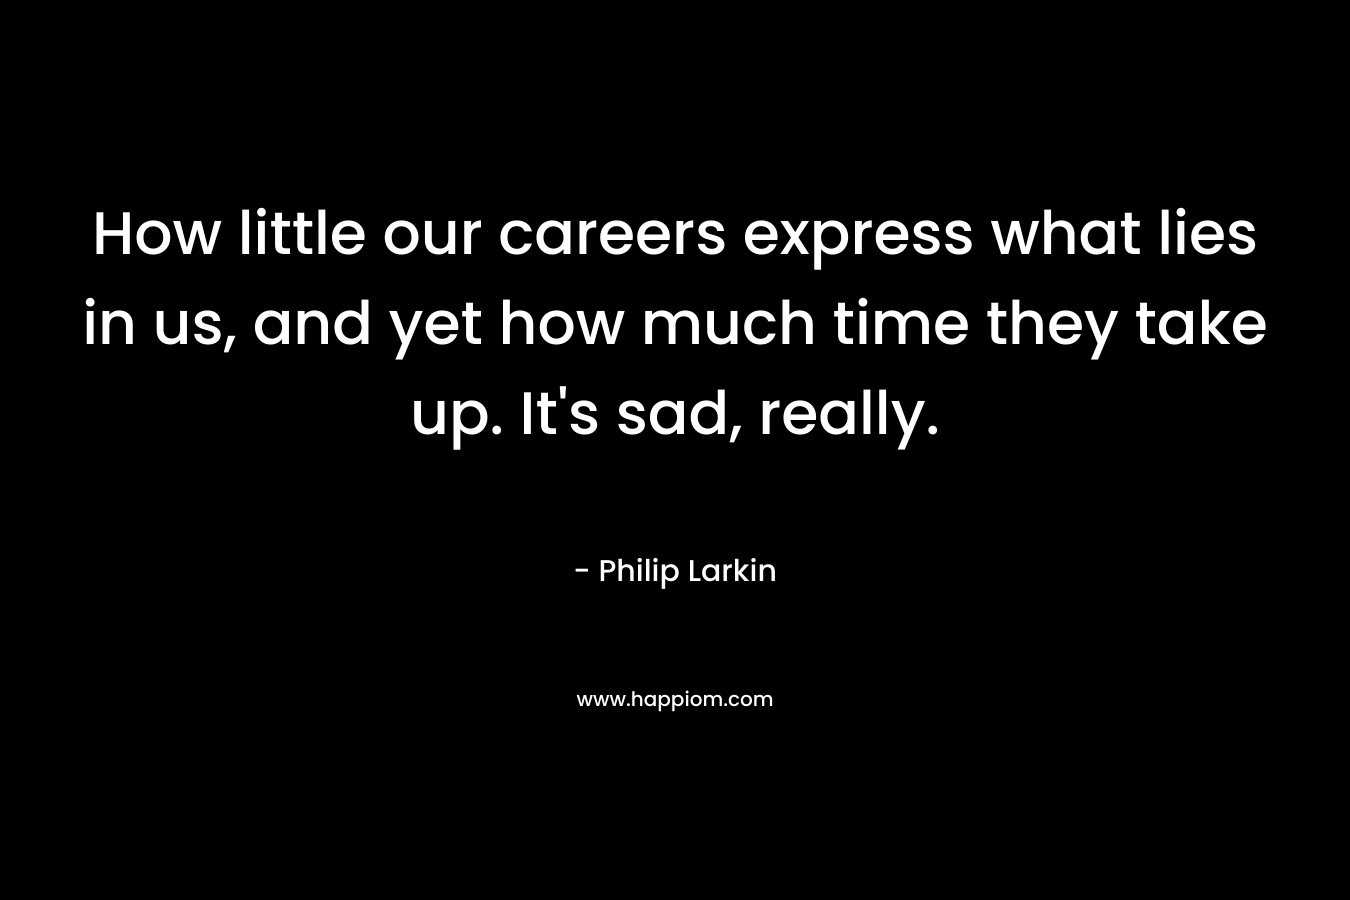 How little our careers express what lies in us, and yet how much time they take up. It’s sad, really. – Philip Larkin